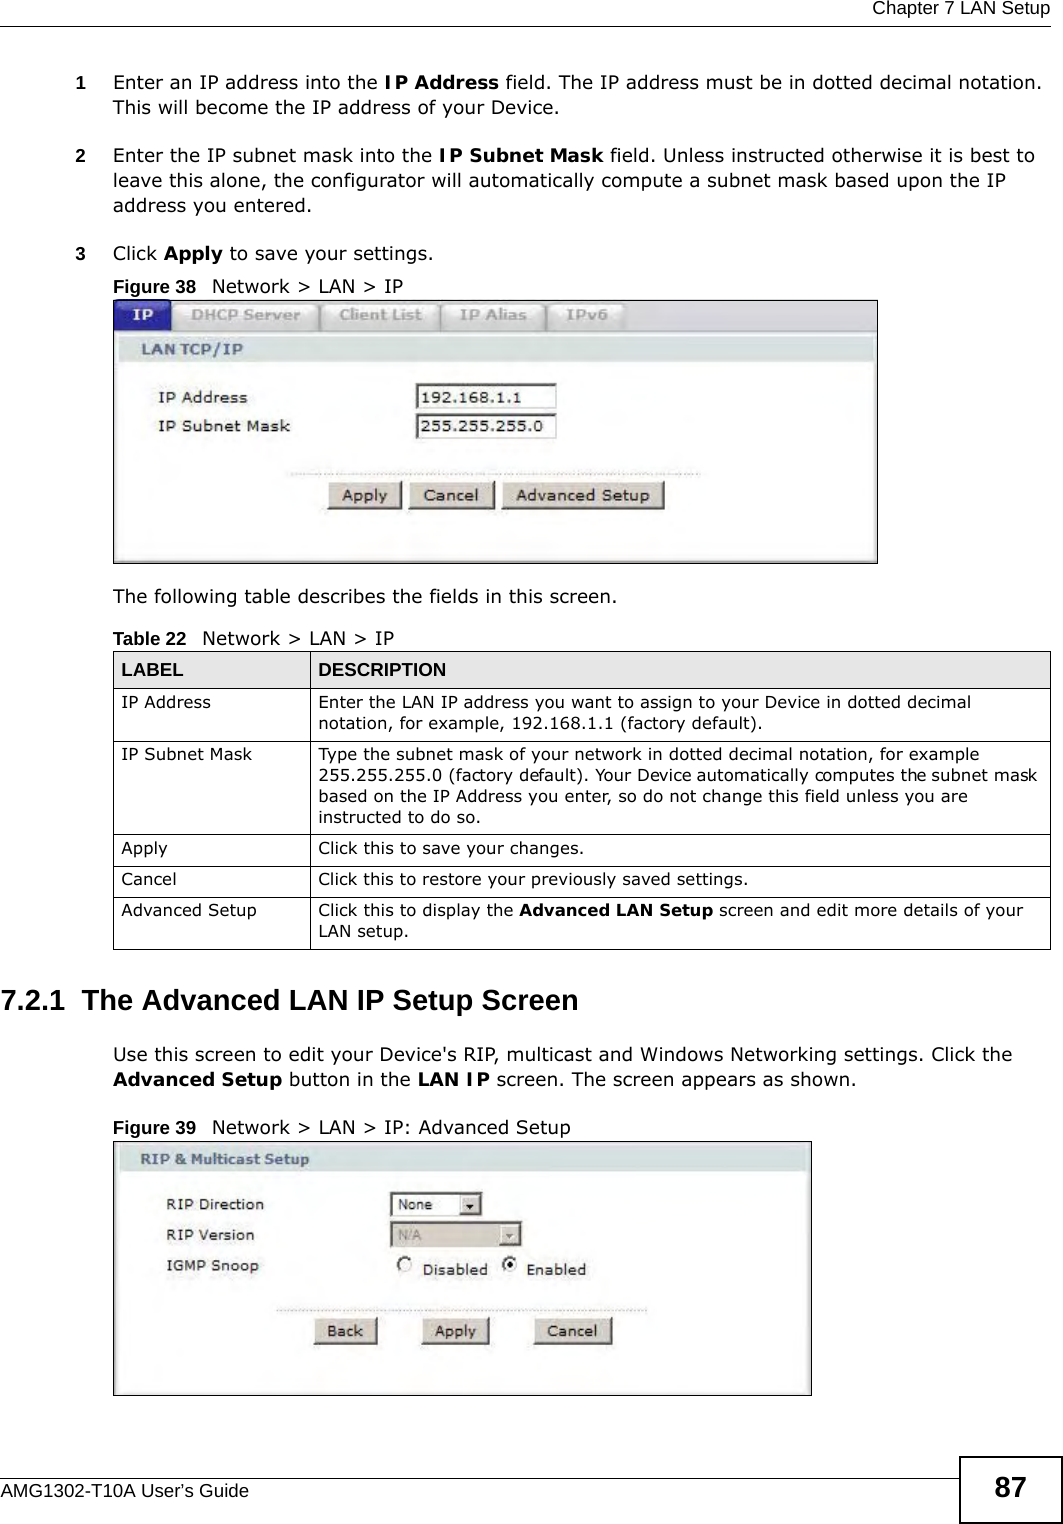  Chapter 7 LAN SetupAMG1302-T10A User’s Guide 871Enter an IP address into the IP Address field. The IP address must be in dotted decimal notation. This will become the IP address of your Device.2Enter the IP subnet mask into the IP Subnet Mask field. Unless instructed otherwise it is best to leave this alone, the configurator will automatically compute a subnet mask based upon the IP address you entered.3Click Apply to save your settings.Figure 38   Network &gt; LAN &gt; IPThe following table describes the fields in this screen.  7.2.1  The Advanced LAN IP Setup Screen Use this screen to edit your Device&apos;s RIP, multicast and Windows Networking settings. Click the Advanced Setup button in the LAN IP screen. The screen appears as shown.Figure 39   Network &gt; LAN &gt; IP: Advanced SetupTable 22   Network &gt; LAN &gt; IPLABEL DESCRIPTIONIP Address Enter the LAN IP address you want to assign to your Device in dotted decimal notation, for example, 192.168.1.1 (factory default). IP Subnet Mask  Type the subnet mask of your network in dotted decimal notation, for example 255.255.255.0 (factory default). Your Device automatically computes the subnet mask based on the IP Address you enter, so do not change this field unless you are instructed to do so.Apply Click this to save your changes.Cancel Click this to restore your previously saved settings.Advanced Setup Click this to display the Advanced LAN Setup screen and edit more details of your LAN setup.